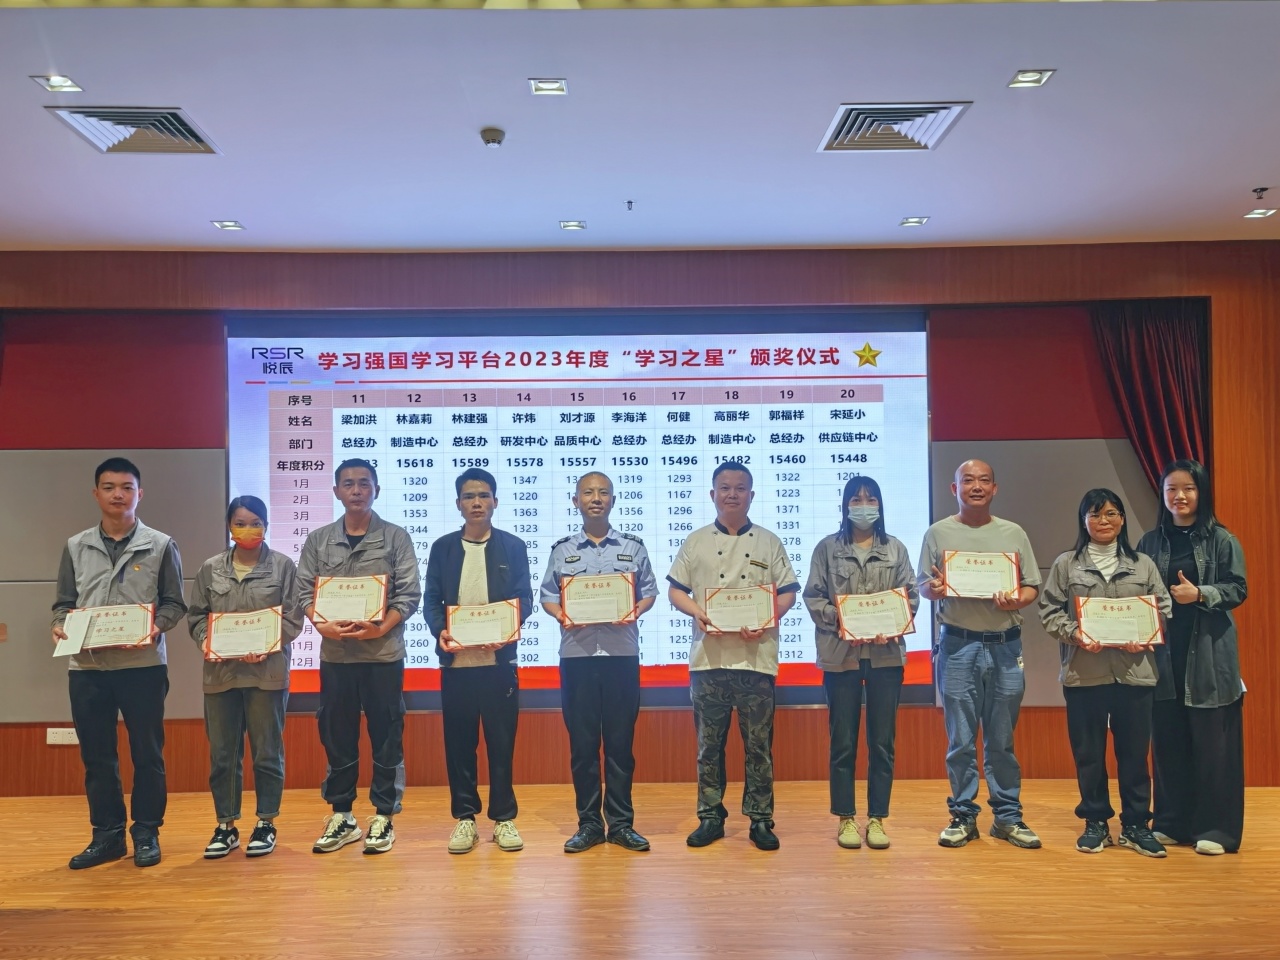 Recognizing Advanced | Yuechen's 2023 Award Ceremony was successfully completed!